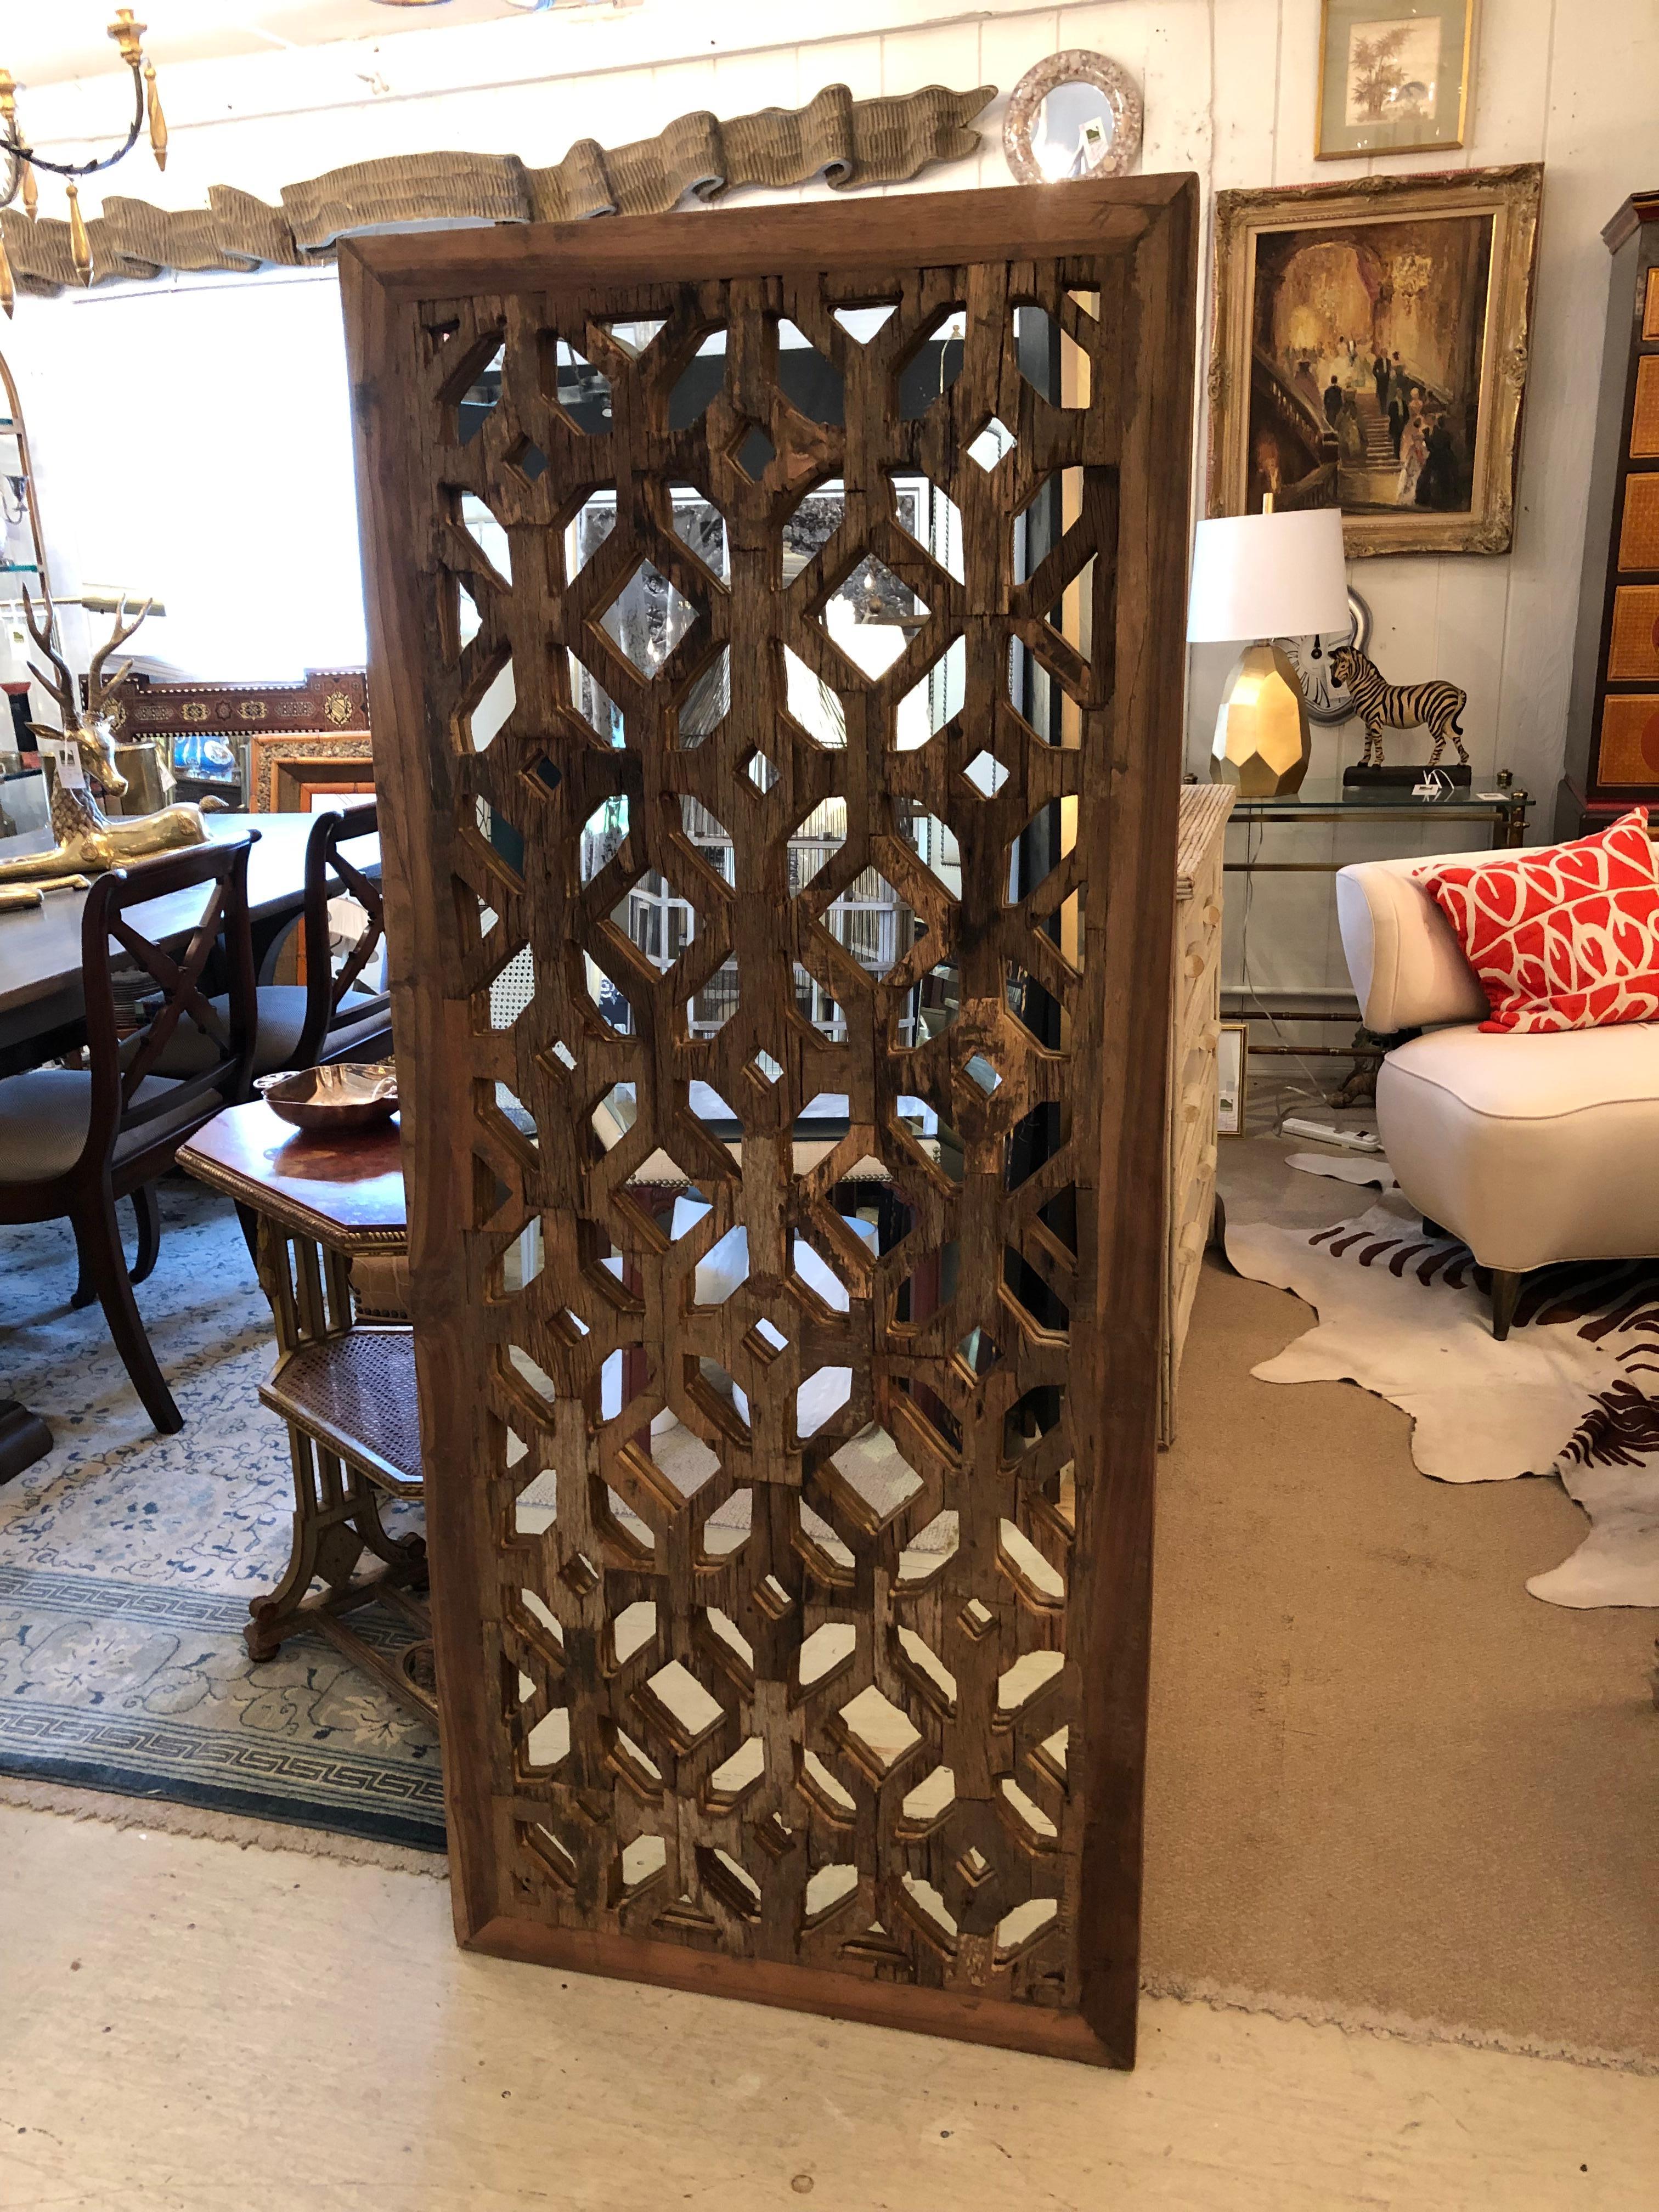 The Baladi mirror is an eye catching textural piece using reclaimed wood sourced in India as molds for cast marble window screens. The geometric shapes create a wonderful decorative pattern and feeling of India and far off lands.